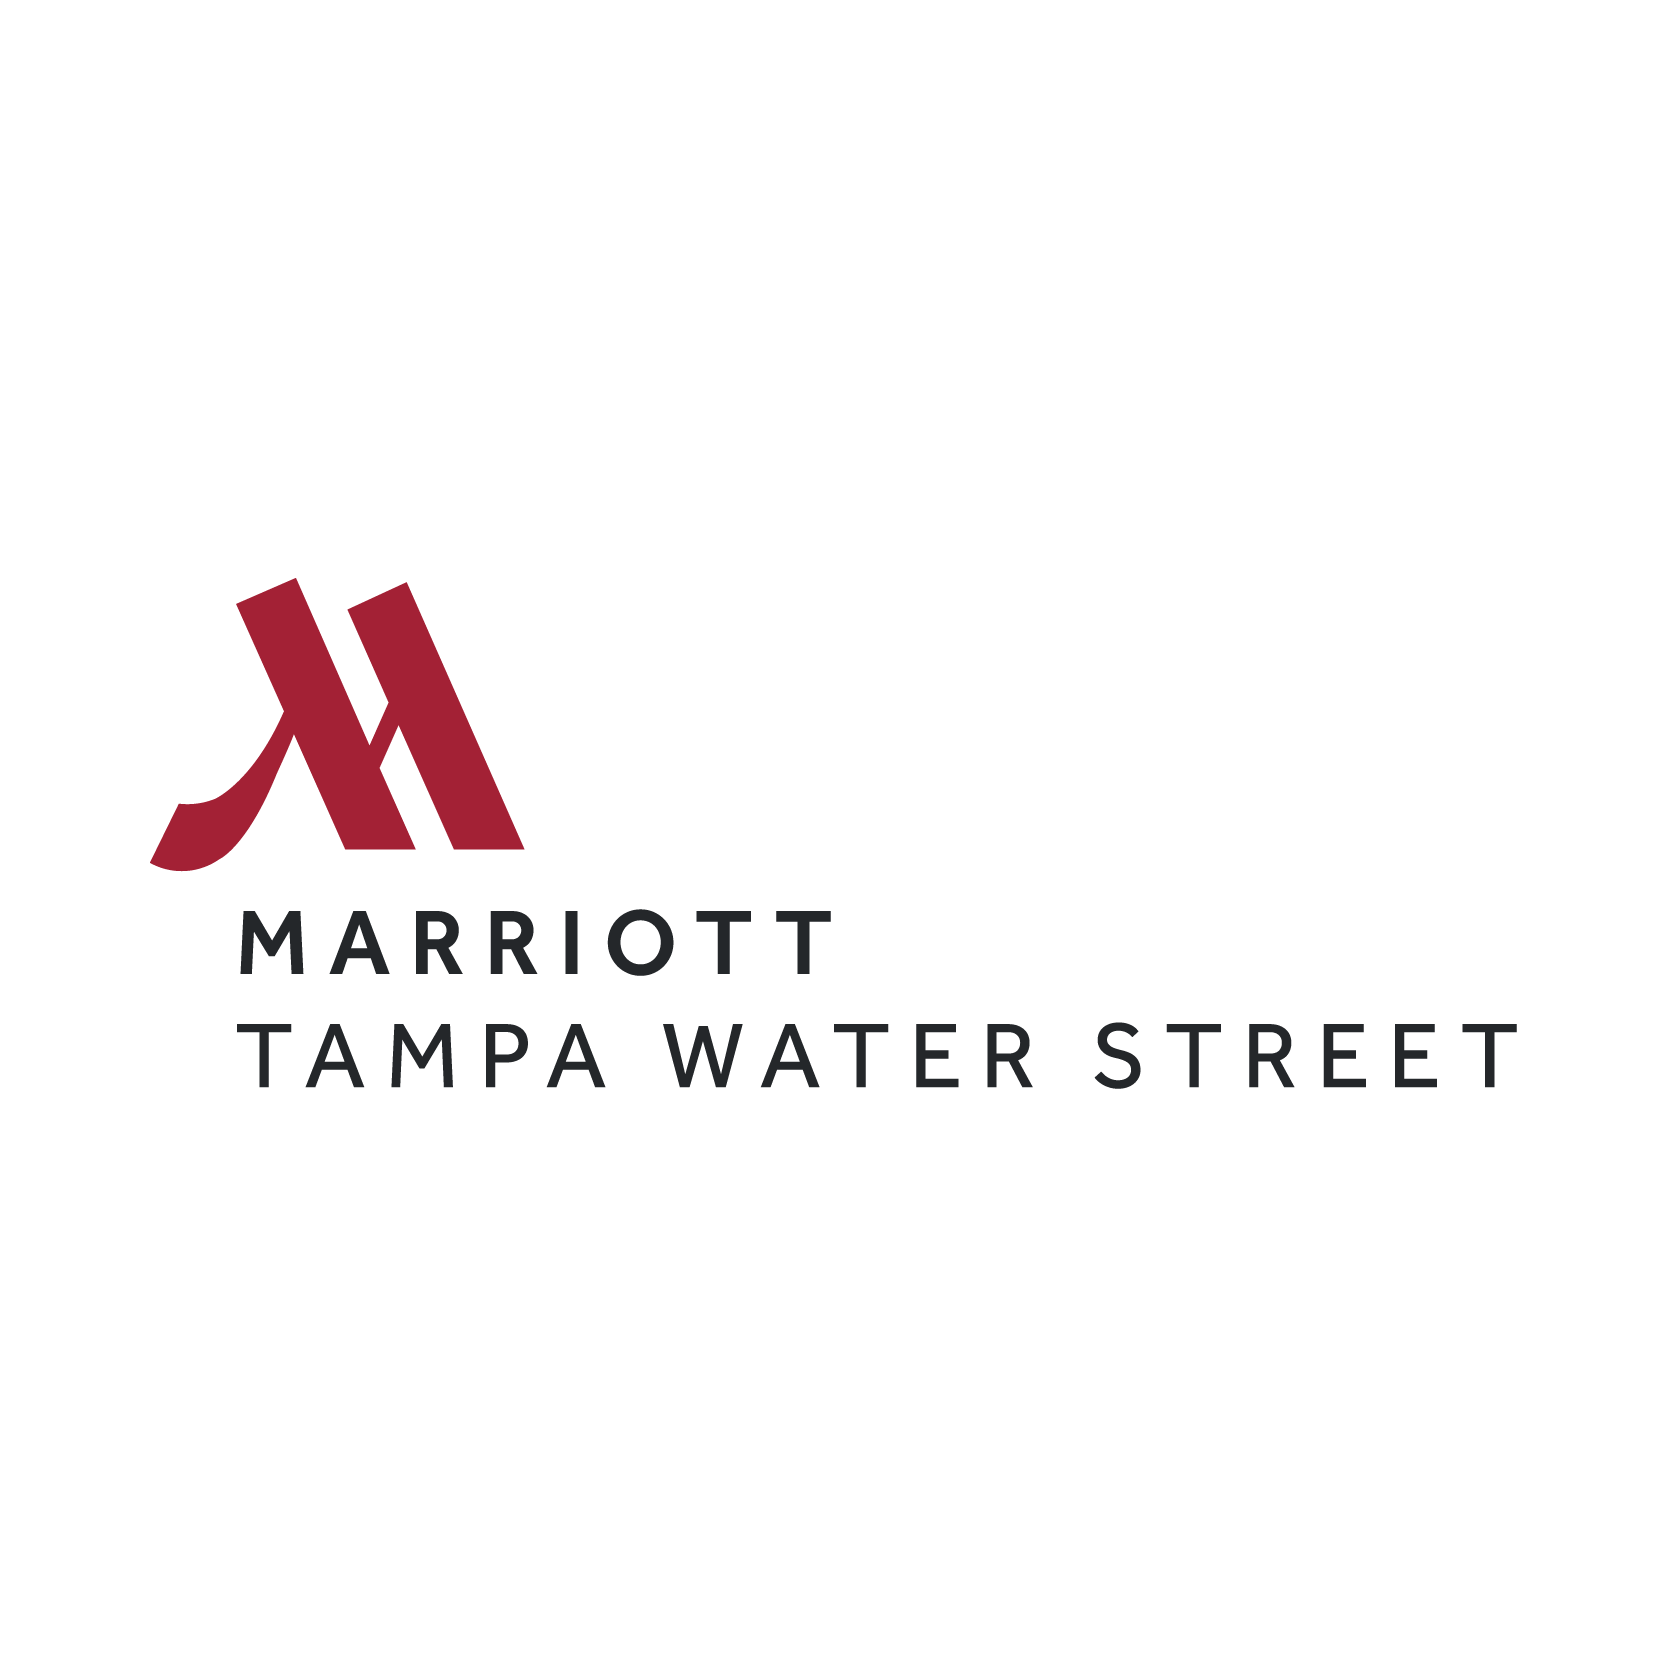 Rise above the rest at Tampa Marriott Water Street.